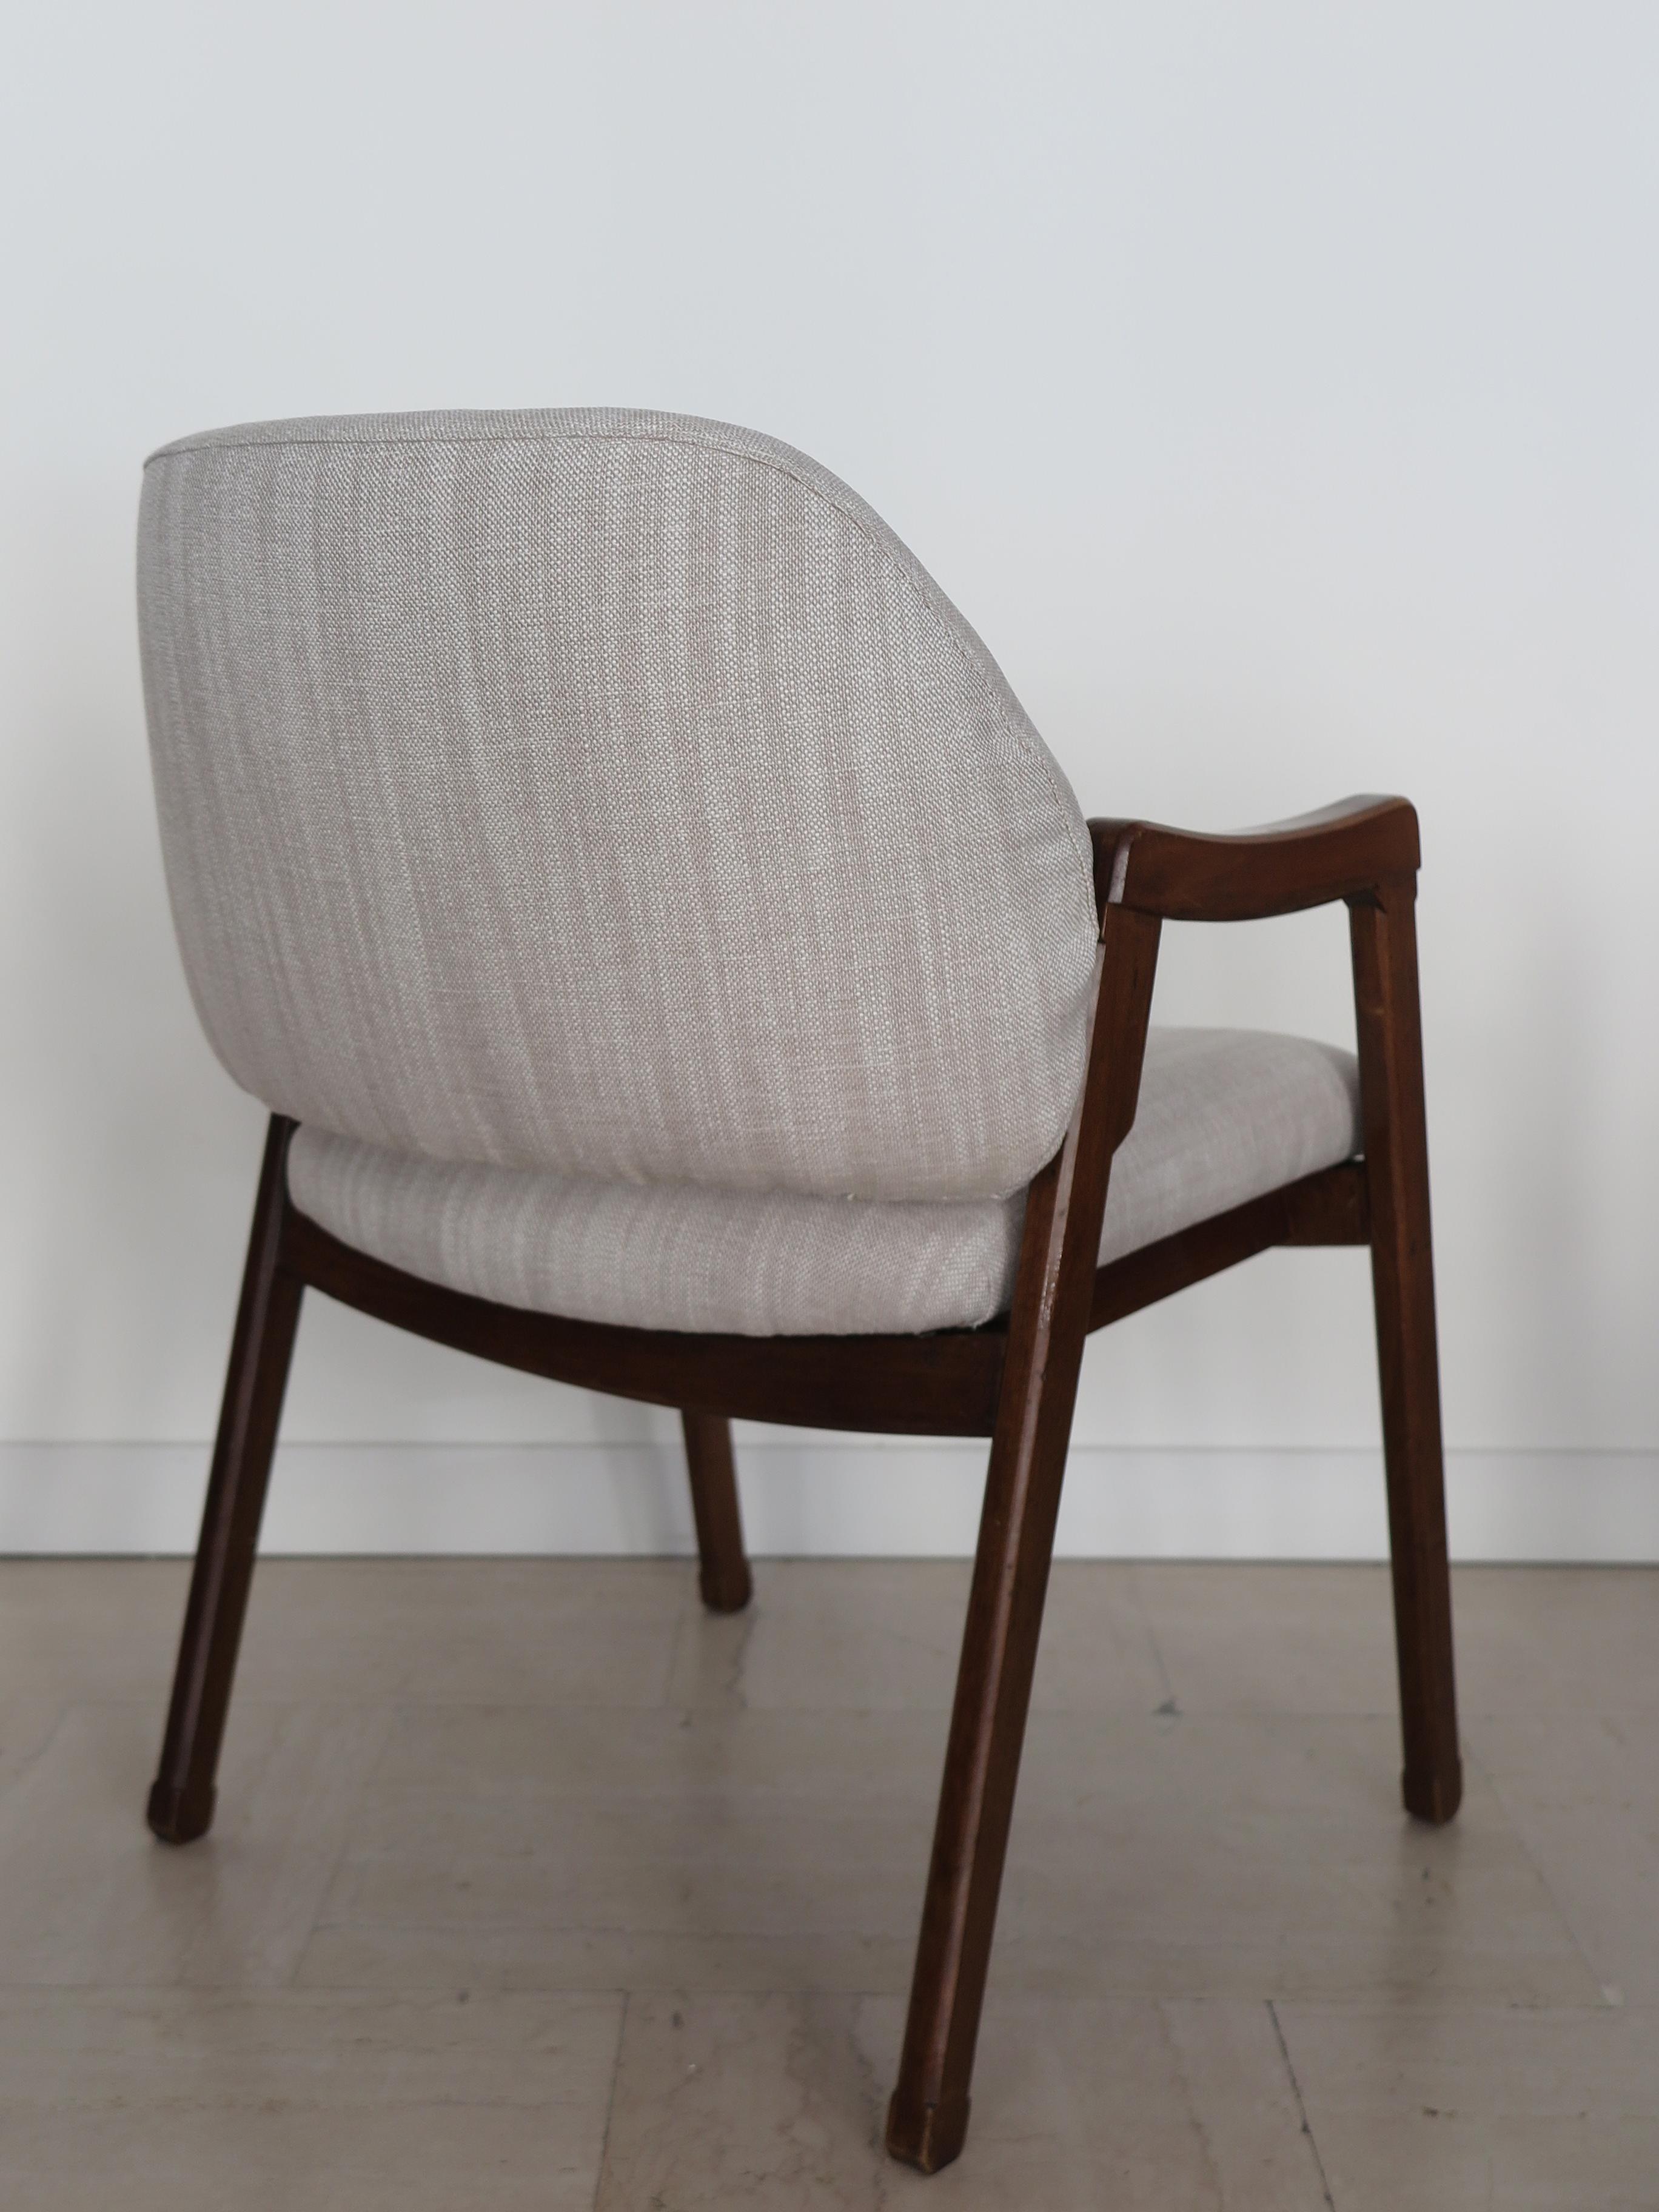 Ico Parisi Italian Midcentury Fabric Wood Armchair Model 814 for Cassina, 1960s For Sale 1